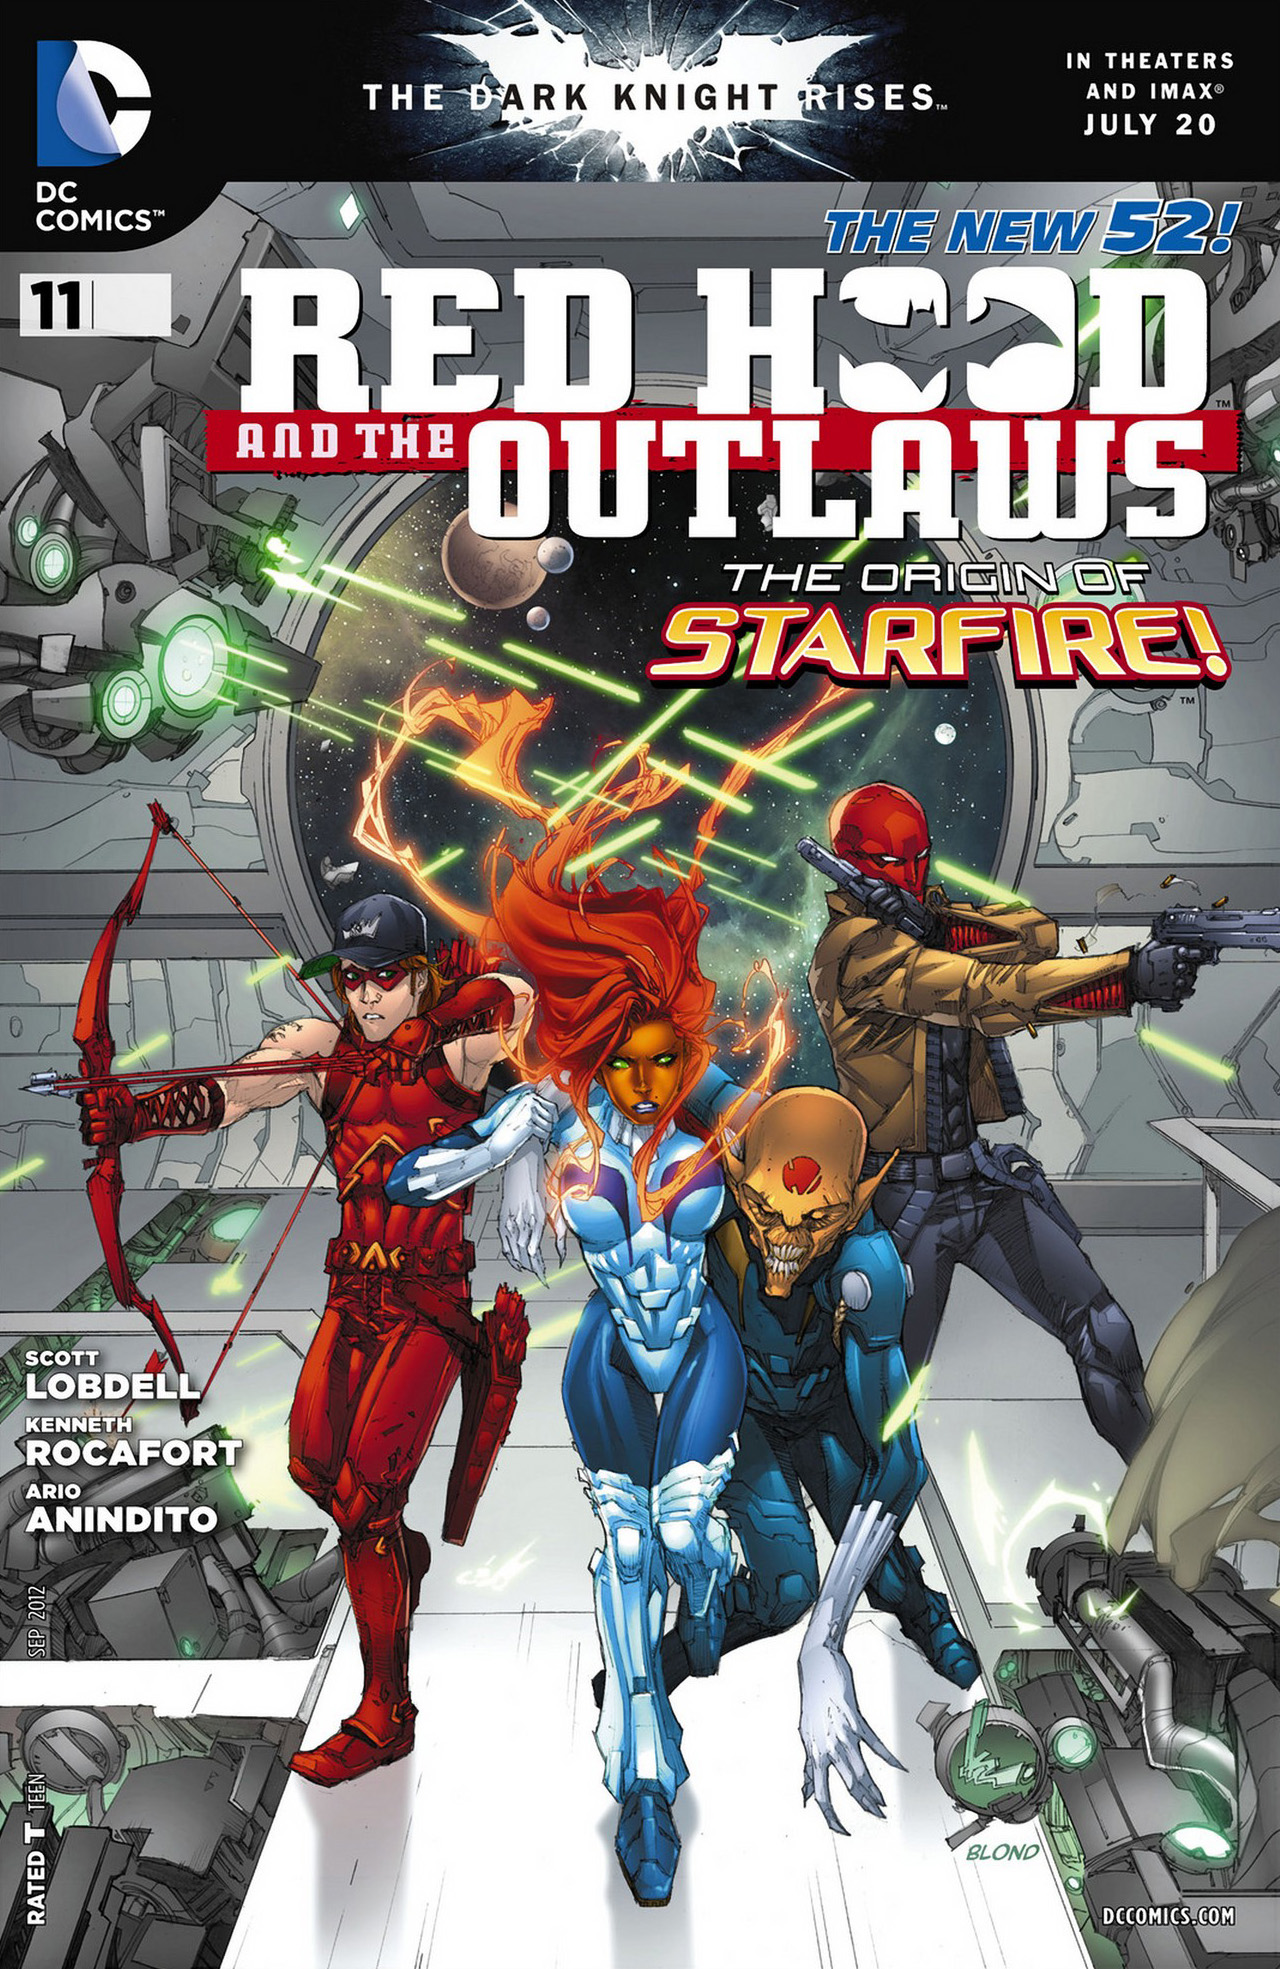 Red Hood and the Outlaws Vol. 1 #11